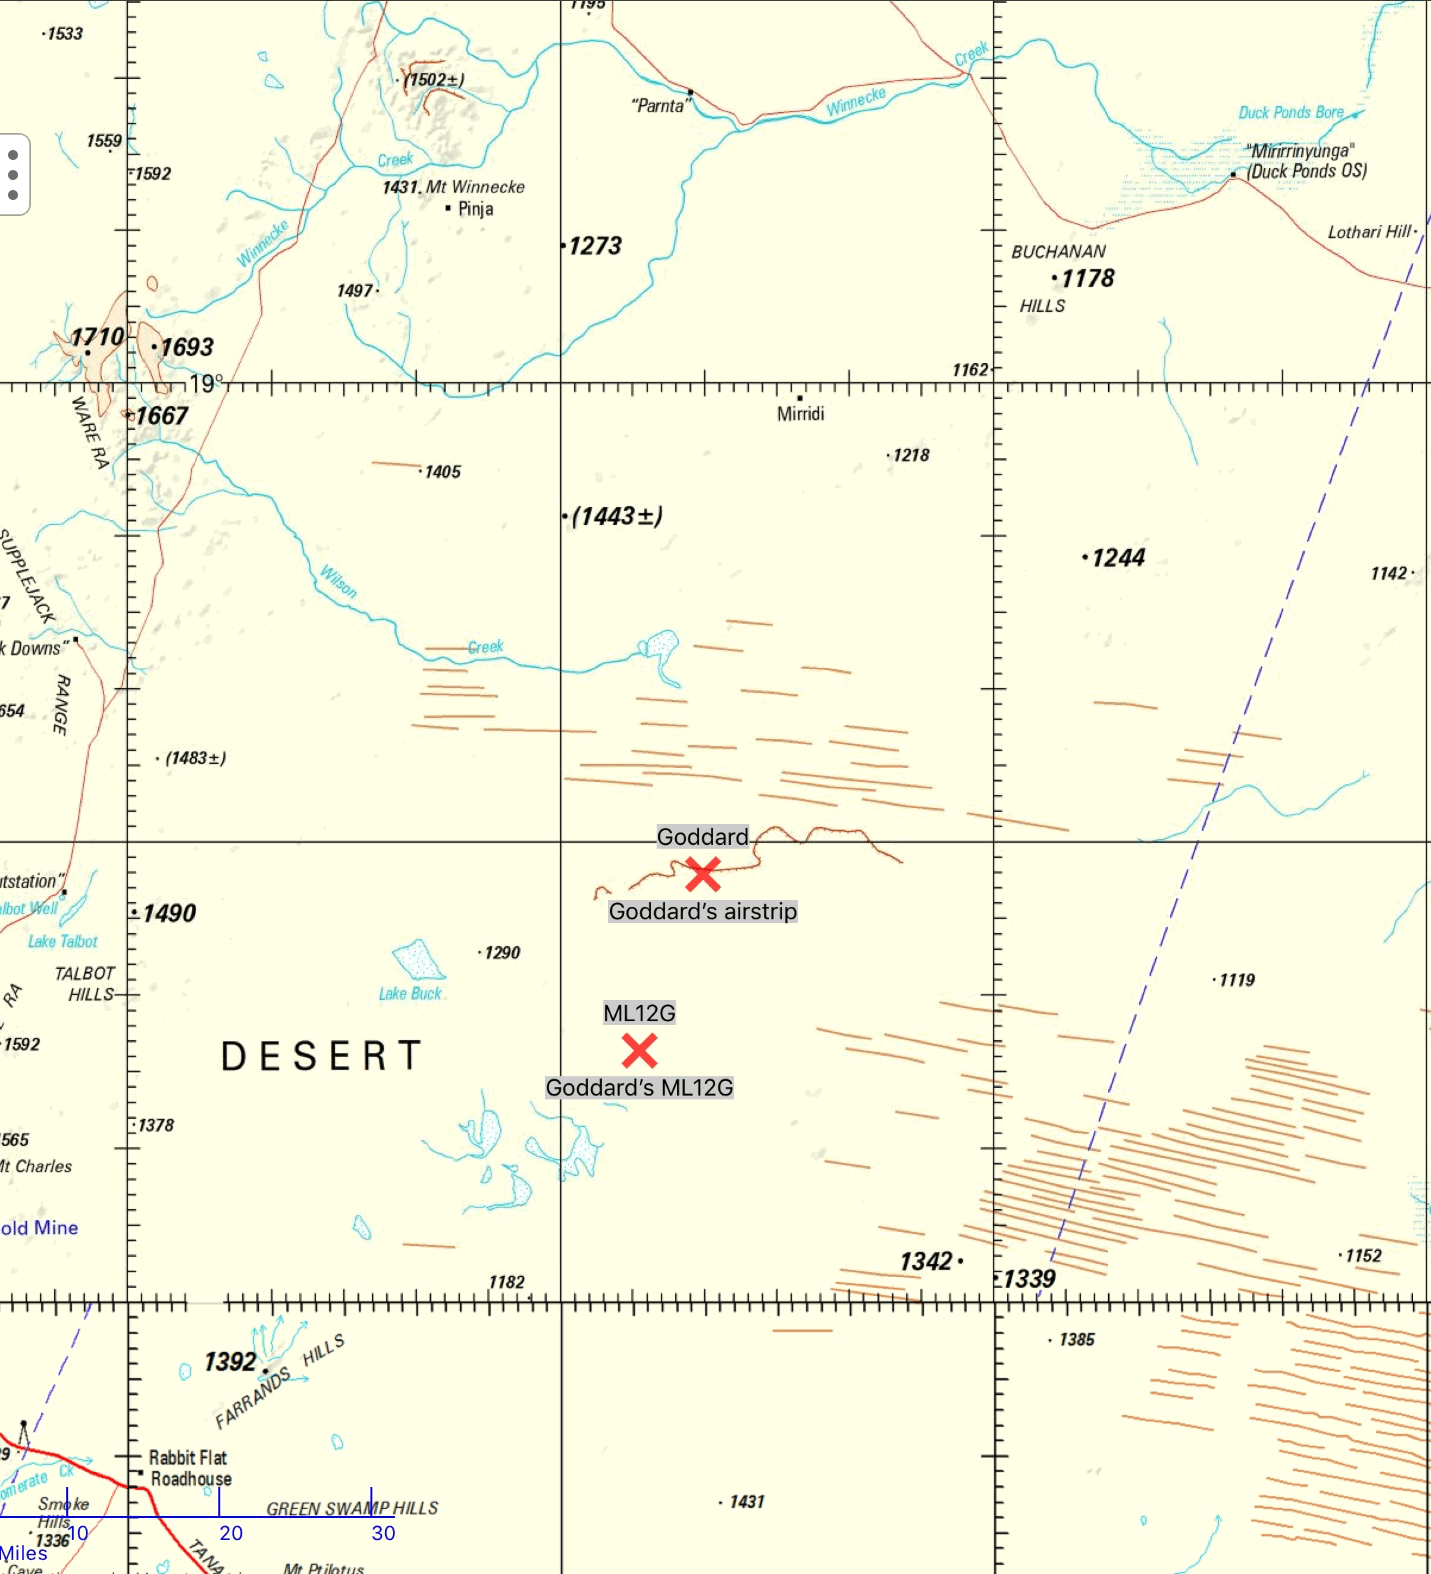 locations of Goddards prospect and airstrip